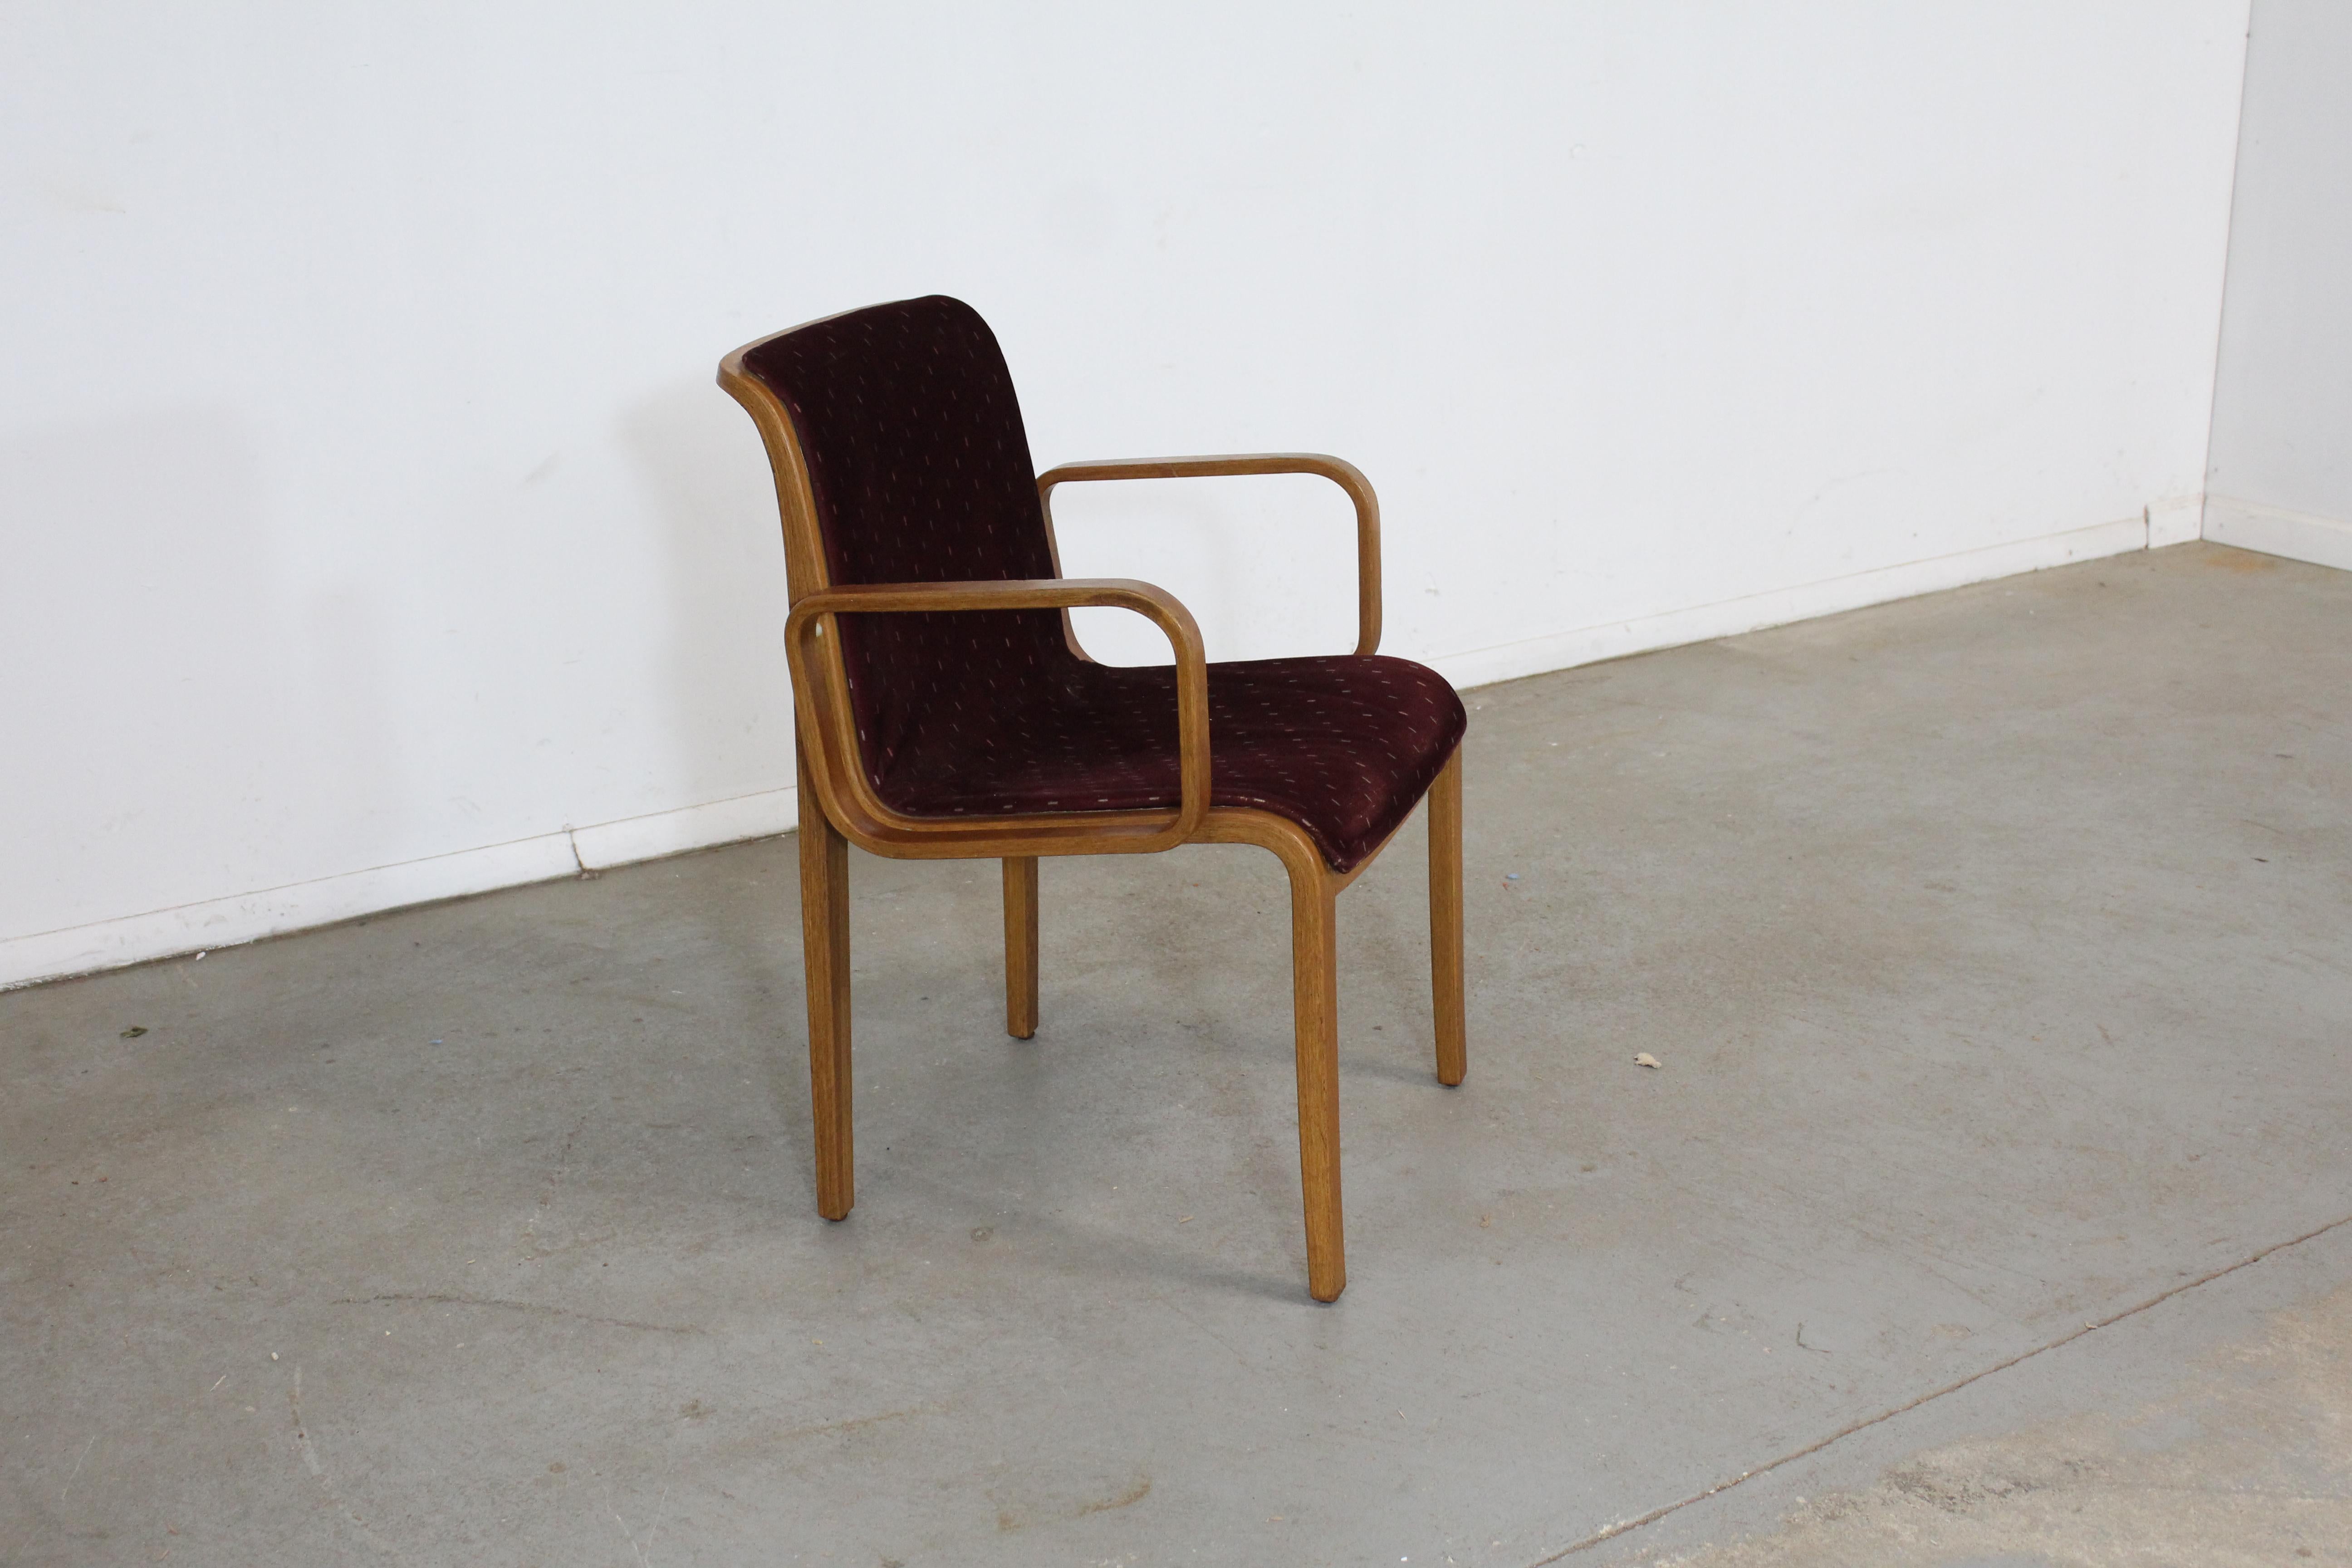 Mid-Century Danish Modern Bill Stevens knoll walnut arm chair

Offered is a vintage mid-century arm chair (model 1305UO) designed by Bill Stevens for Knoll circa 1970. It is made with bentwood and has the original upholstery. In good condition